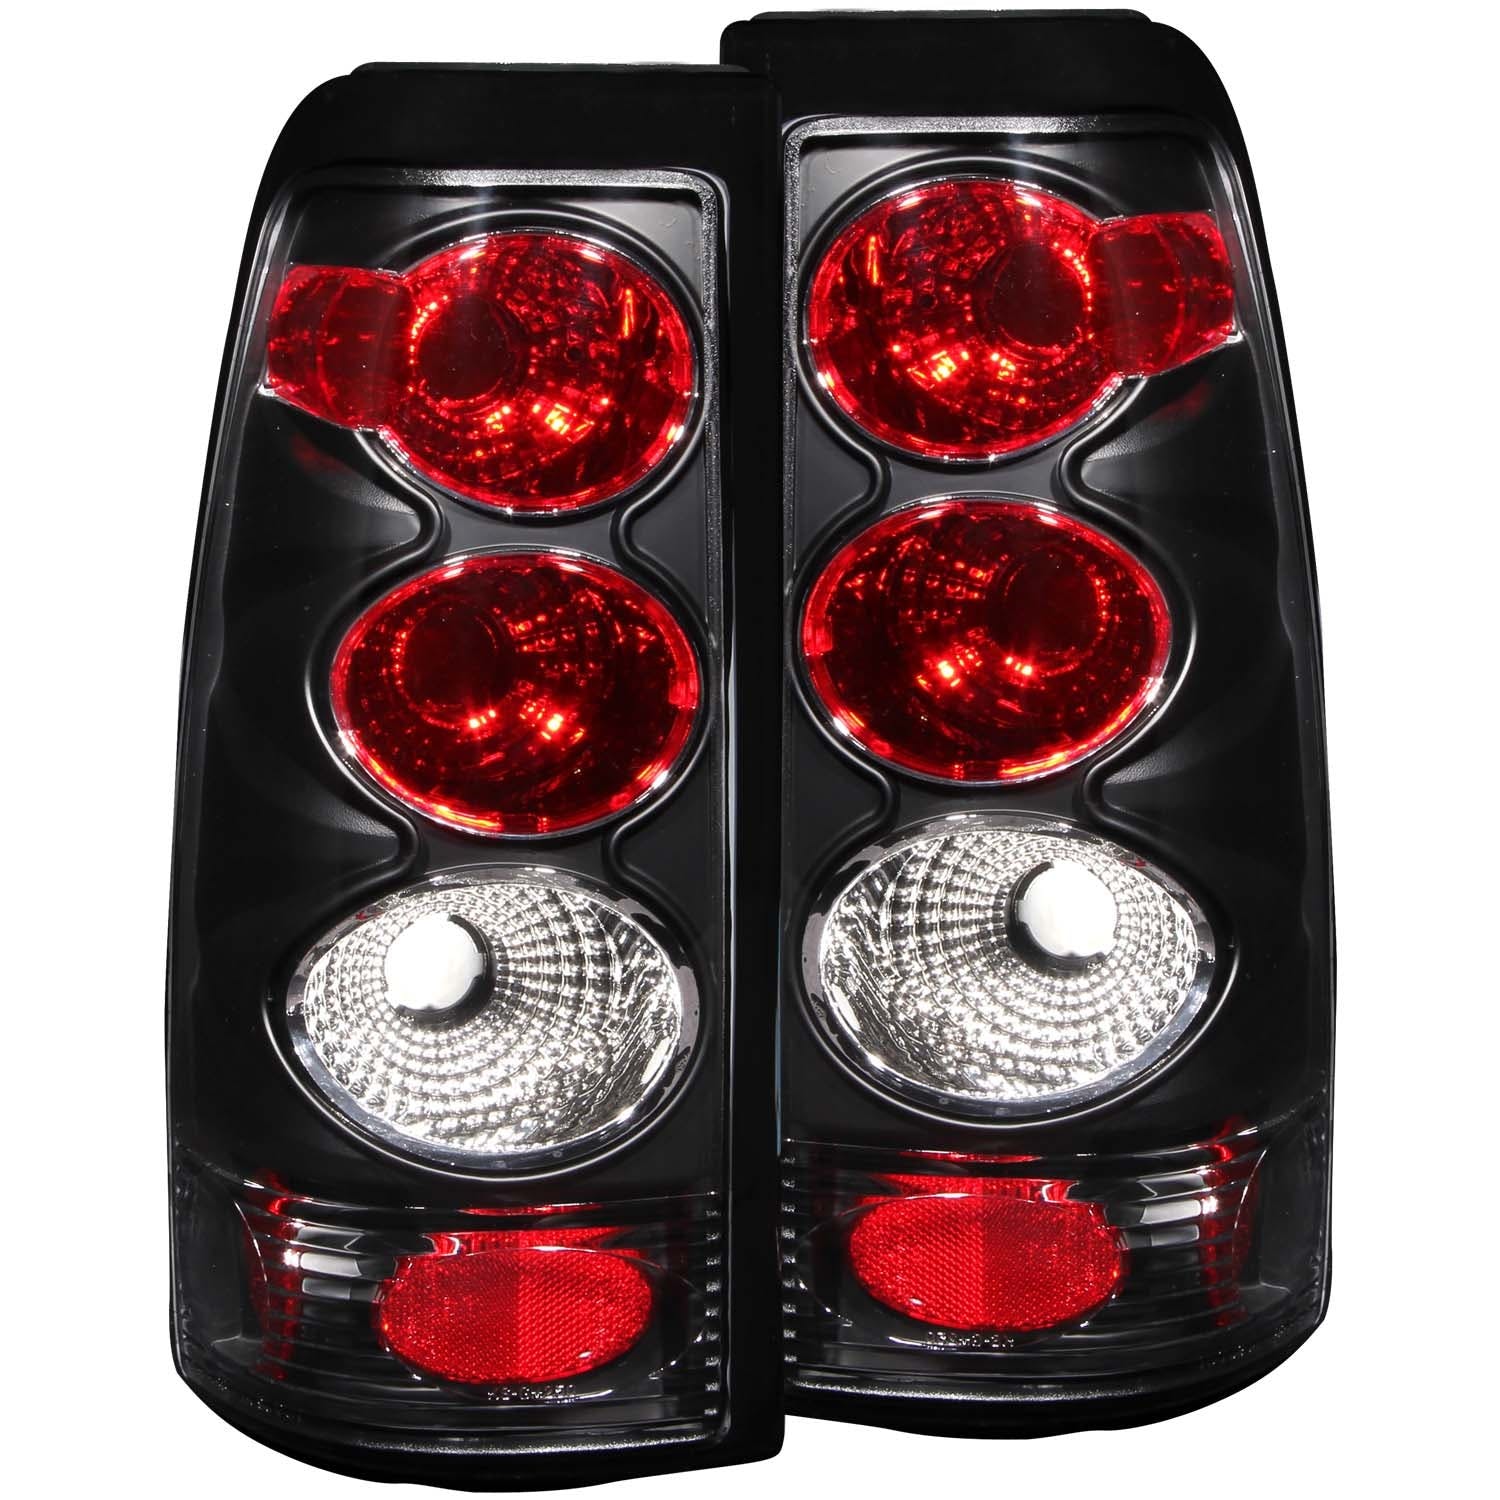 AnzoUSA 211025 Taillights Black